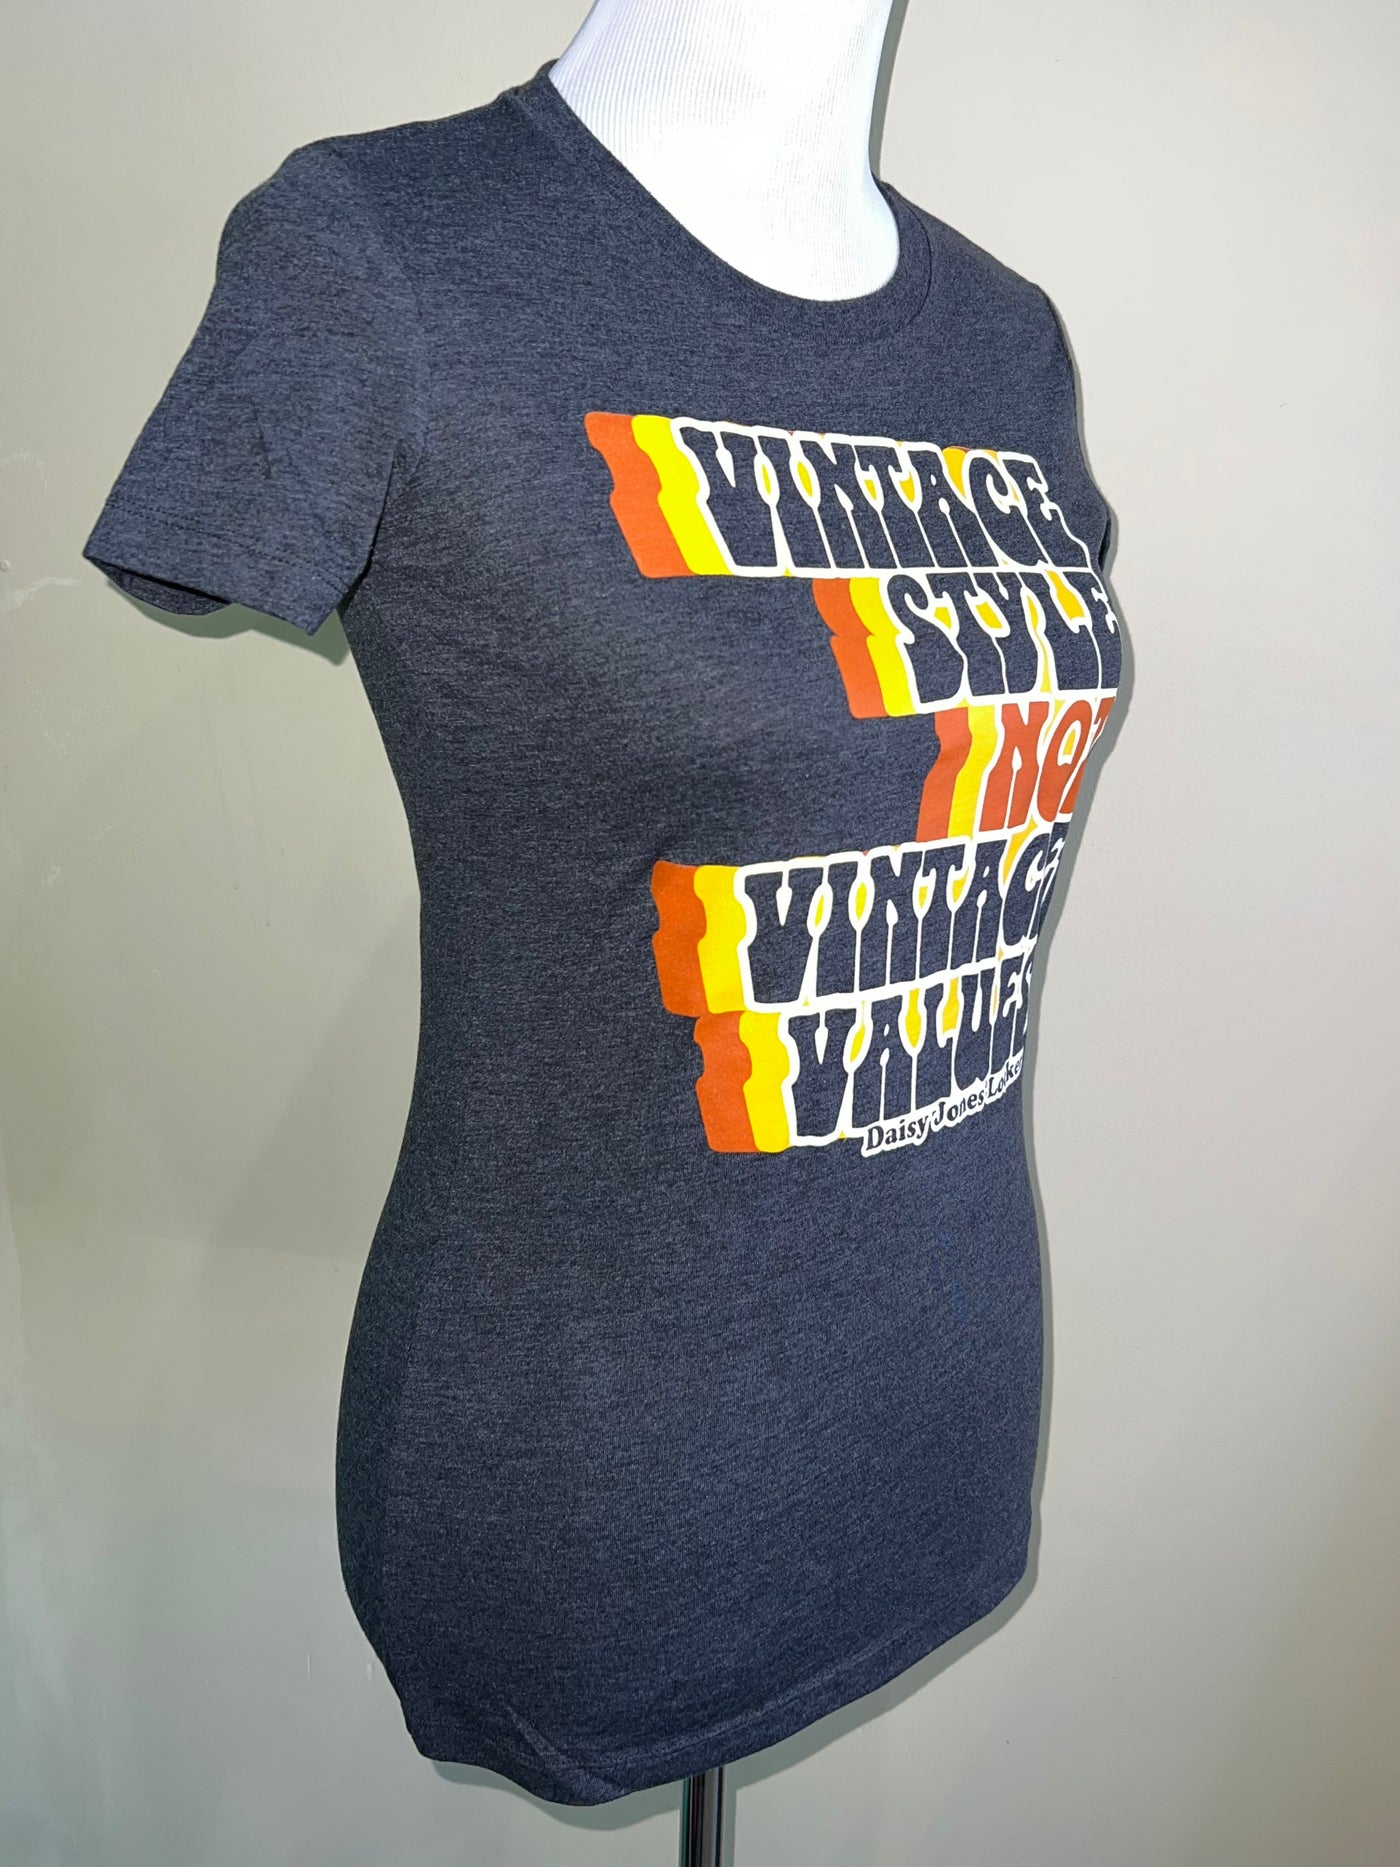 Vintage Style NOT Vintage Values Tee in Dark Grey *Limited Edition*